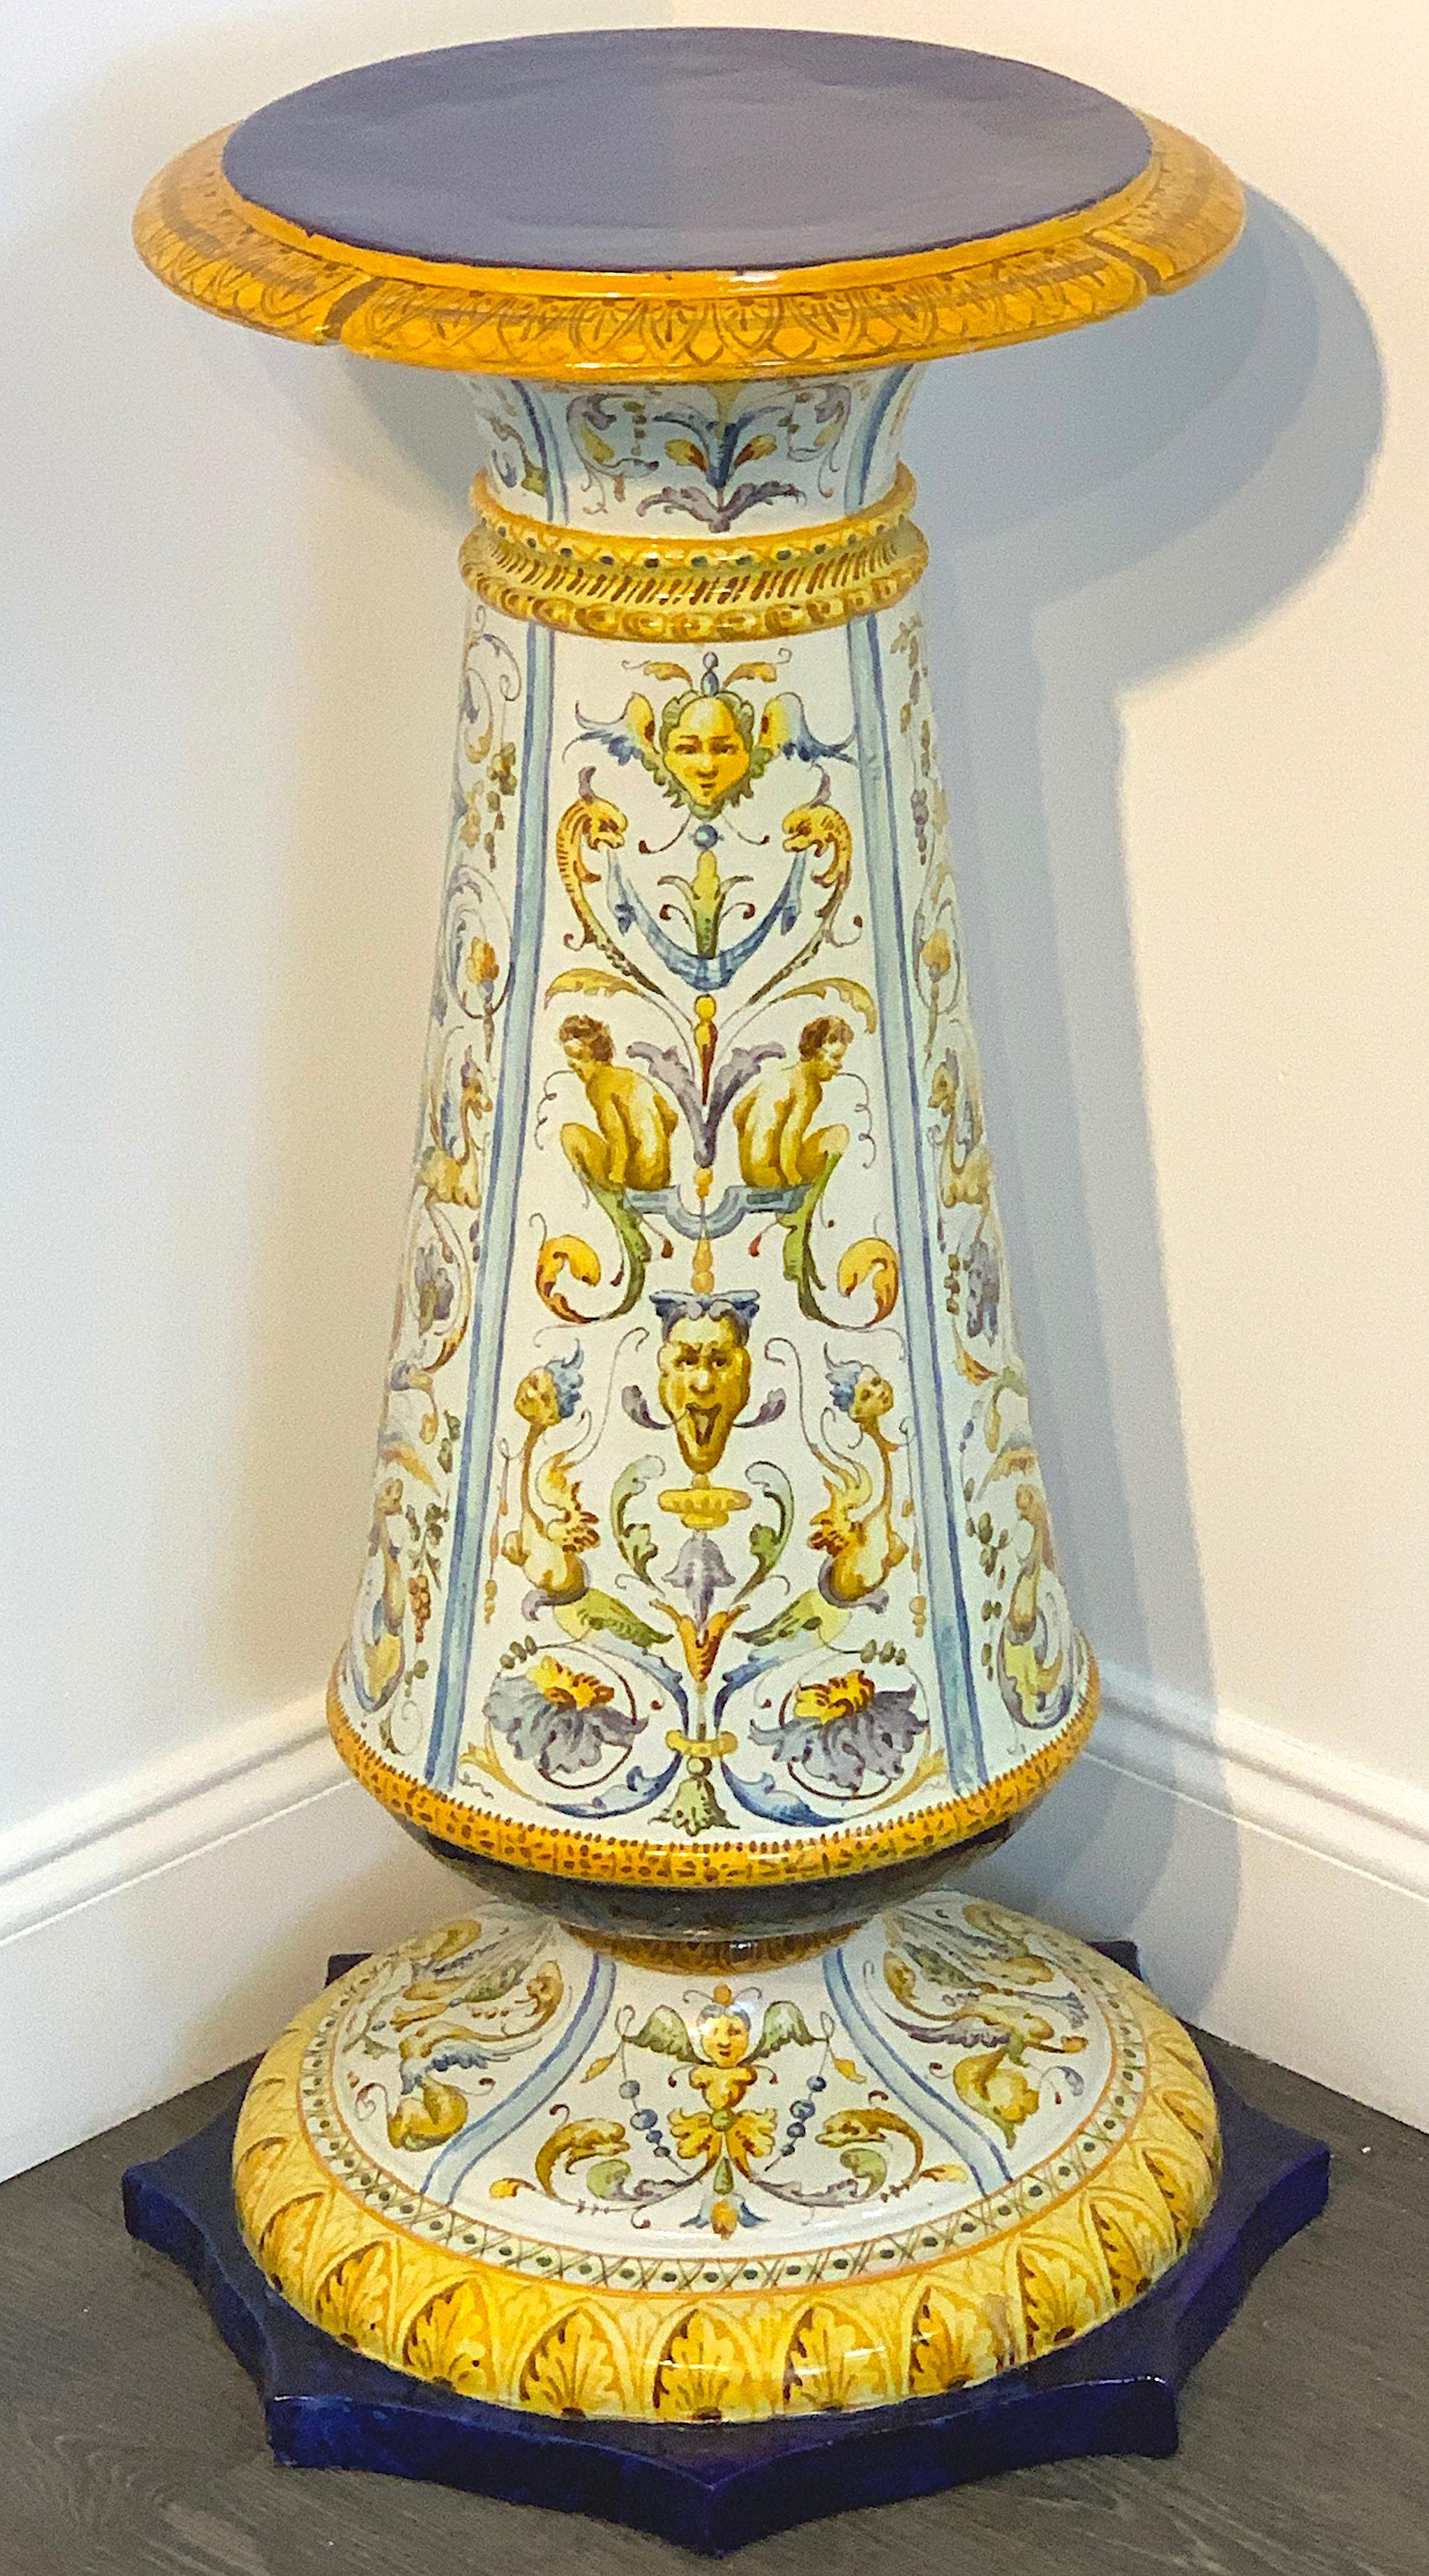 Italian Renaissance style Majolica pedestal by Achille Mollica
With exquisite typical polychromed Renaissance painted decoration
Marked to the underside Achille Mollica Blue crowned 'M'- 
Standing 33